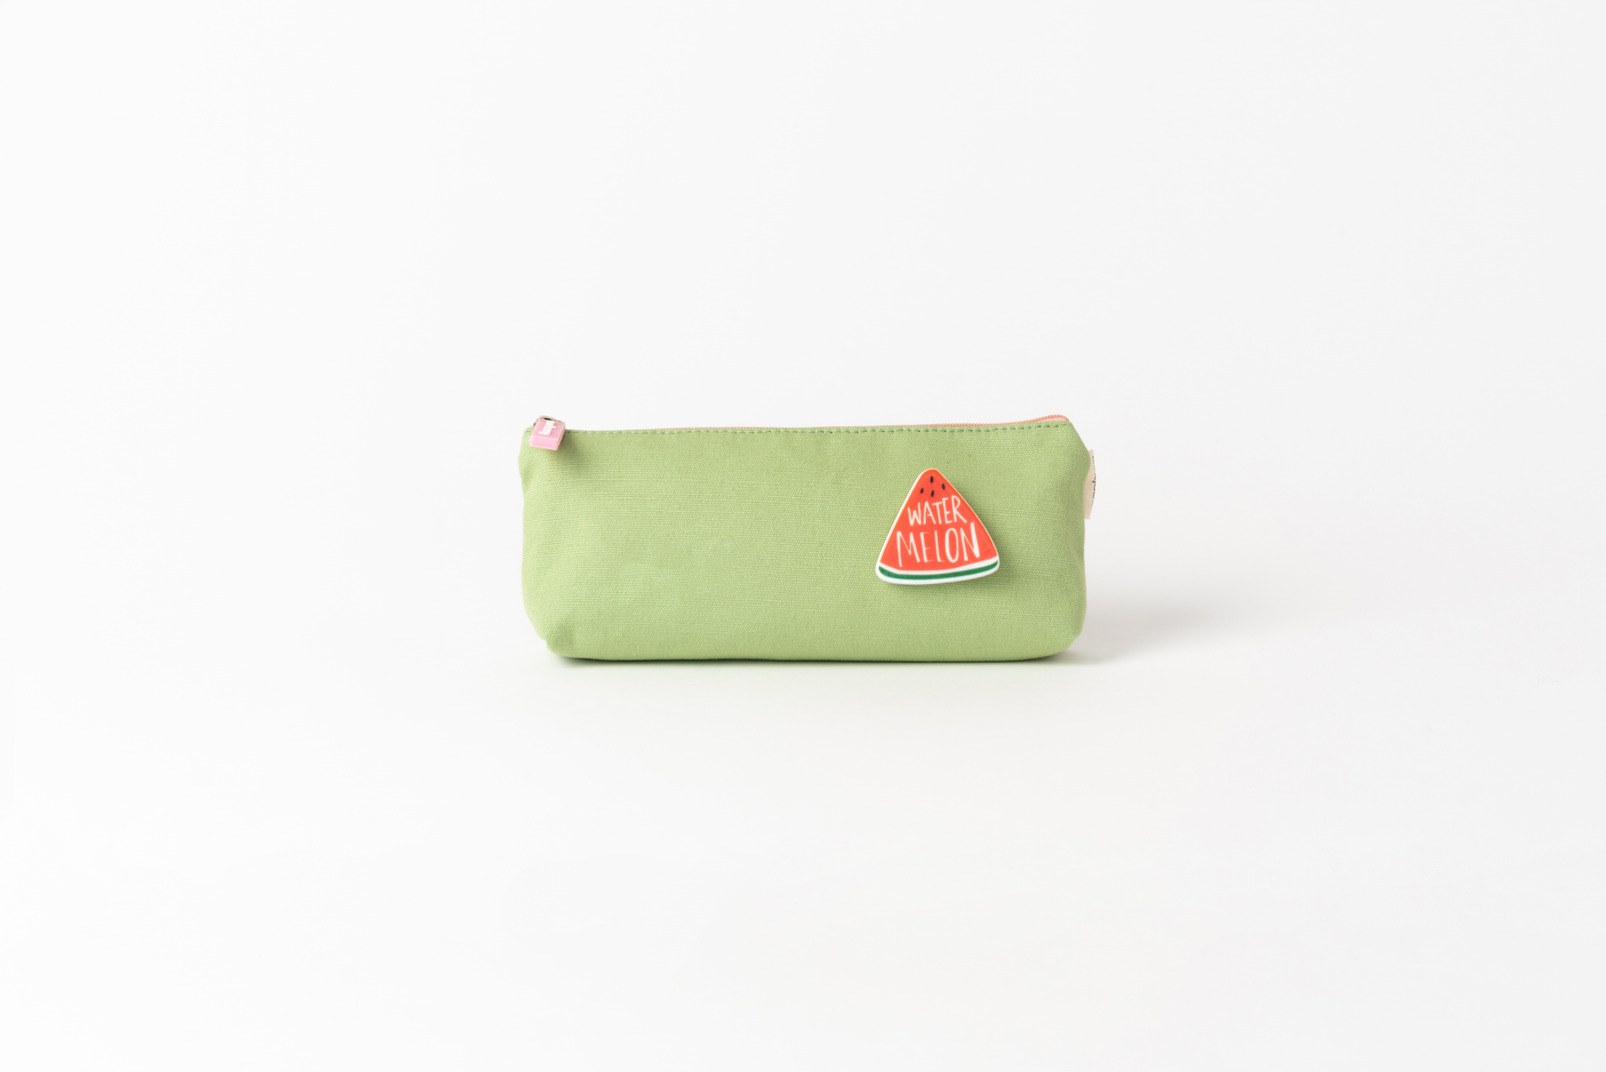 Green pencilbox with watermelon sign on it